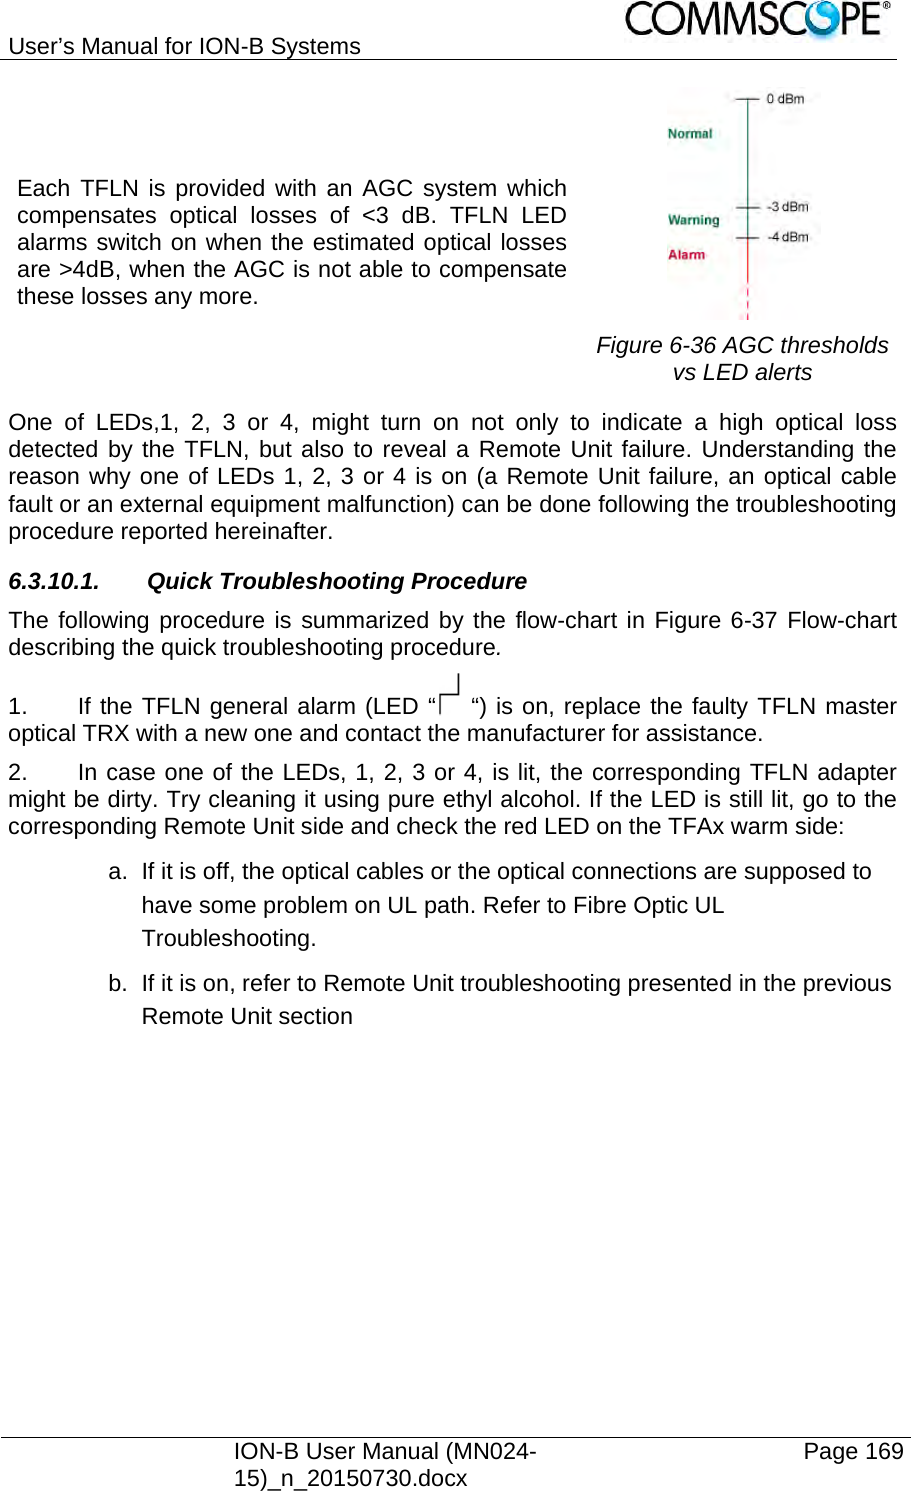 User’s Manual for ION-B Systems    ION-B User Manual (MN024-15)_n_20150730.docx  Page 169 Each TFLN is provided with an AGC system which compensates optical losses of &lt;3 dB. TFLN LED alarms switch on when the estimated optical losses are &gt;4dB, when the AGC is not able to compensate these losses any more.  Figure 6-36 AGC thresholds vs LED alerts One of LEDs,1, 2, 3 or 4, might turn on not only to indicate a high optical loss detected by the TFLN, but also to reveal a Remote Unit failure. Understanding the reason why one of LEDs 1, 2, 3 or 4 is on (a Remote Unit failure, an optical cable fault or an external equipment malfunction) can be done following the troubleshooting procedure reported hereinafter. 6.3.10.1.  Quick Troubleshooting Procedure The following procedure is summarized by the flow-chart in Figure 6-37 Flow-chart describing the quick troubleshooting procedure. 1.  If the TFLN general alarm (LED “  “) is on, replace the faulty TFLN master optical TRX with a new one and contact the manufacturer for assistance. 2.  In case one of the LEDs, 1, 2, 3 or 4, is lit, the corresponding TFLN adapter might be dirty. Try cleaning it using pure ethyl alcohol. If the LED is still lit, go to the corresponding Remote Unit side and check the red LED on the TFAx warm side: a.  If it is off, the optical cables or the optical connections are supposed to have some problem on UL path. Refer to Fibre Optic UL Troubleshooting. b.  If it is on, refer to Remote Unit troubleshooting presented in the previous Remote Unit section     